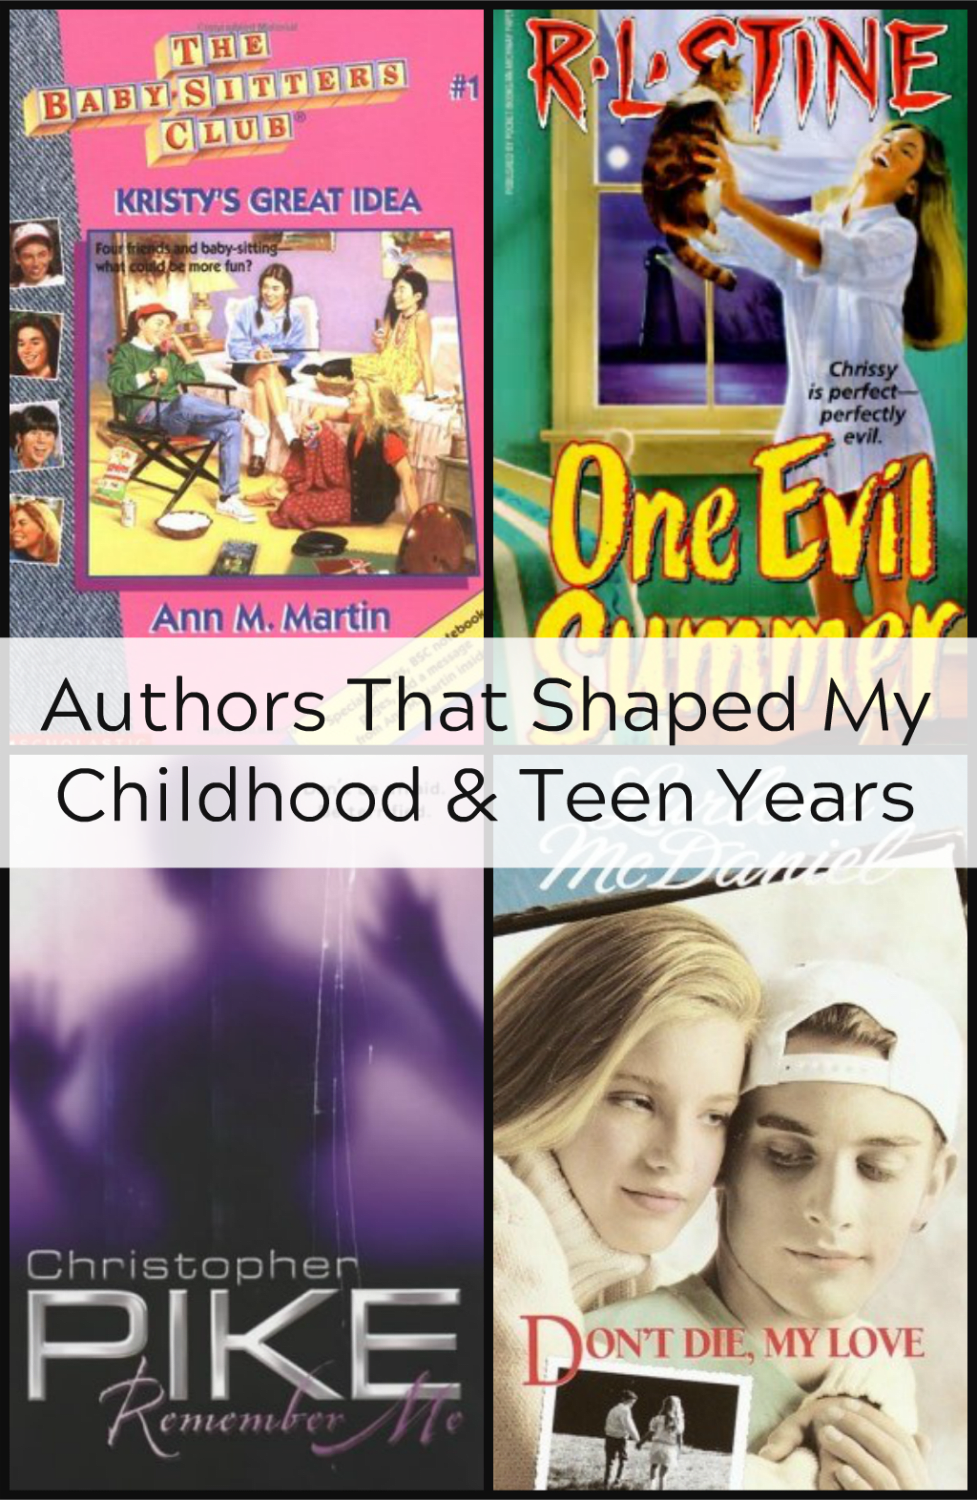 Authors That Shaped My Childhood & Teen Years